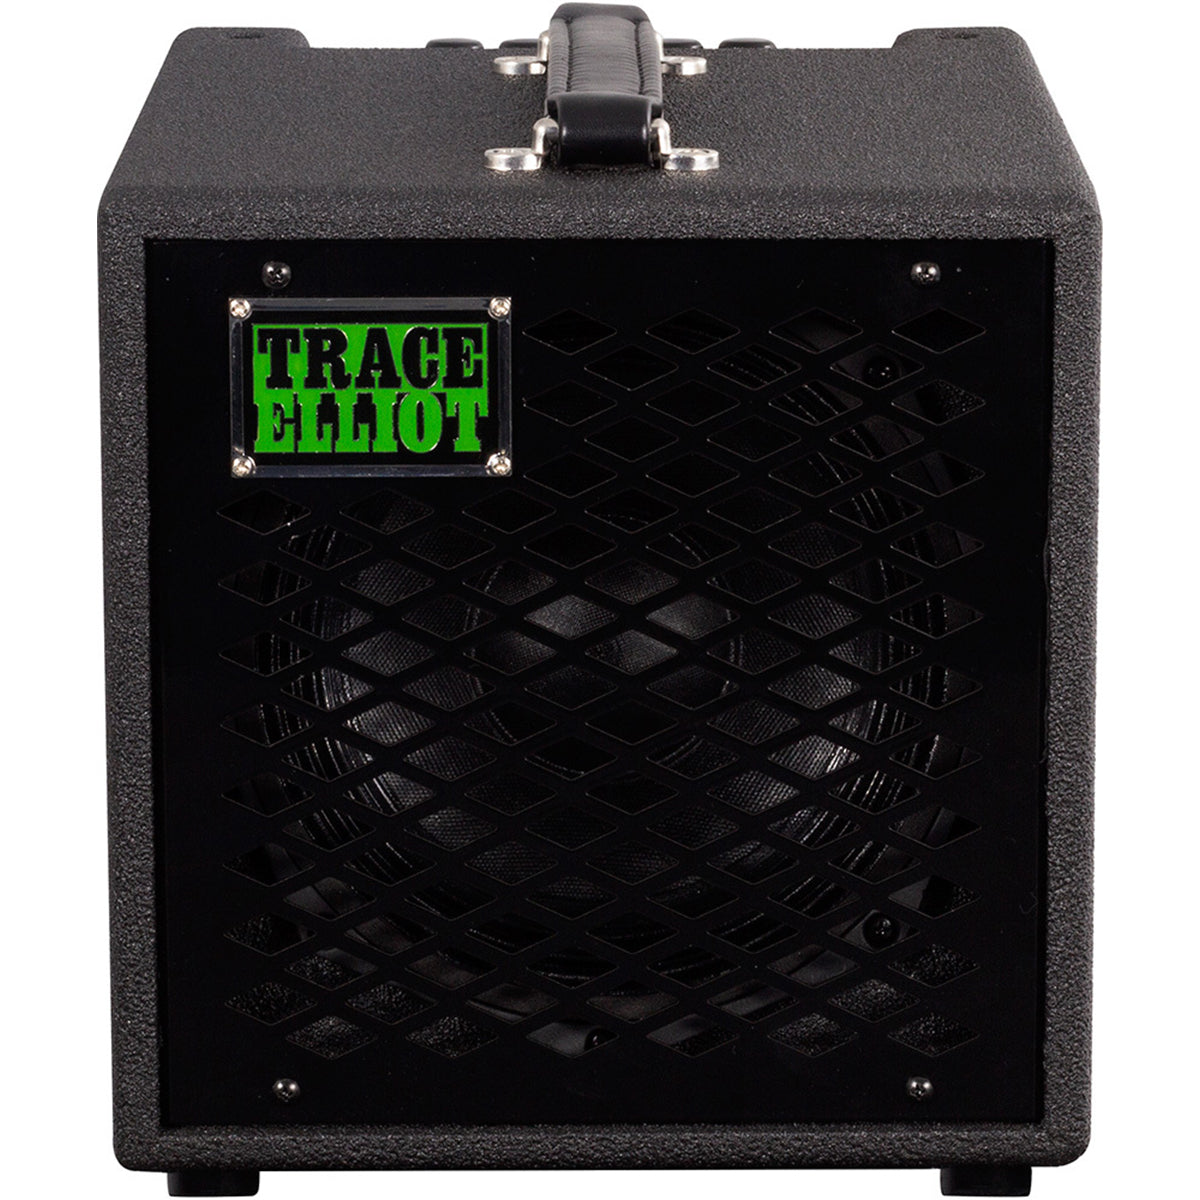 Trace Elliot ELF Series ELFC108 Bass Amplifier Ultra Compact 200w 1x8inch Combo Amp